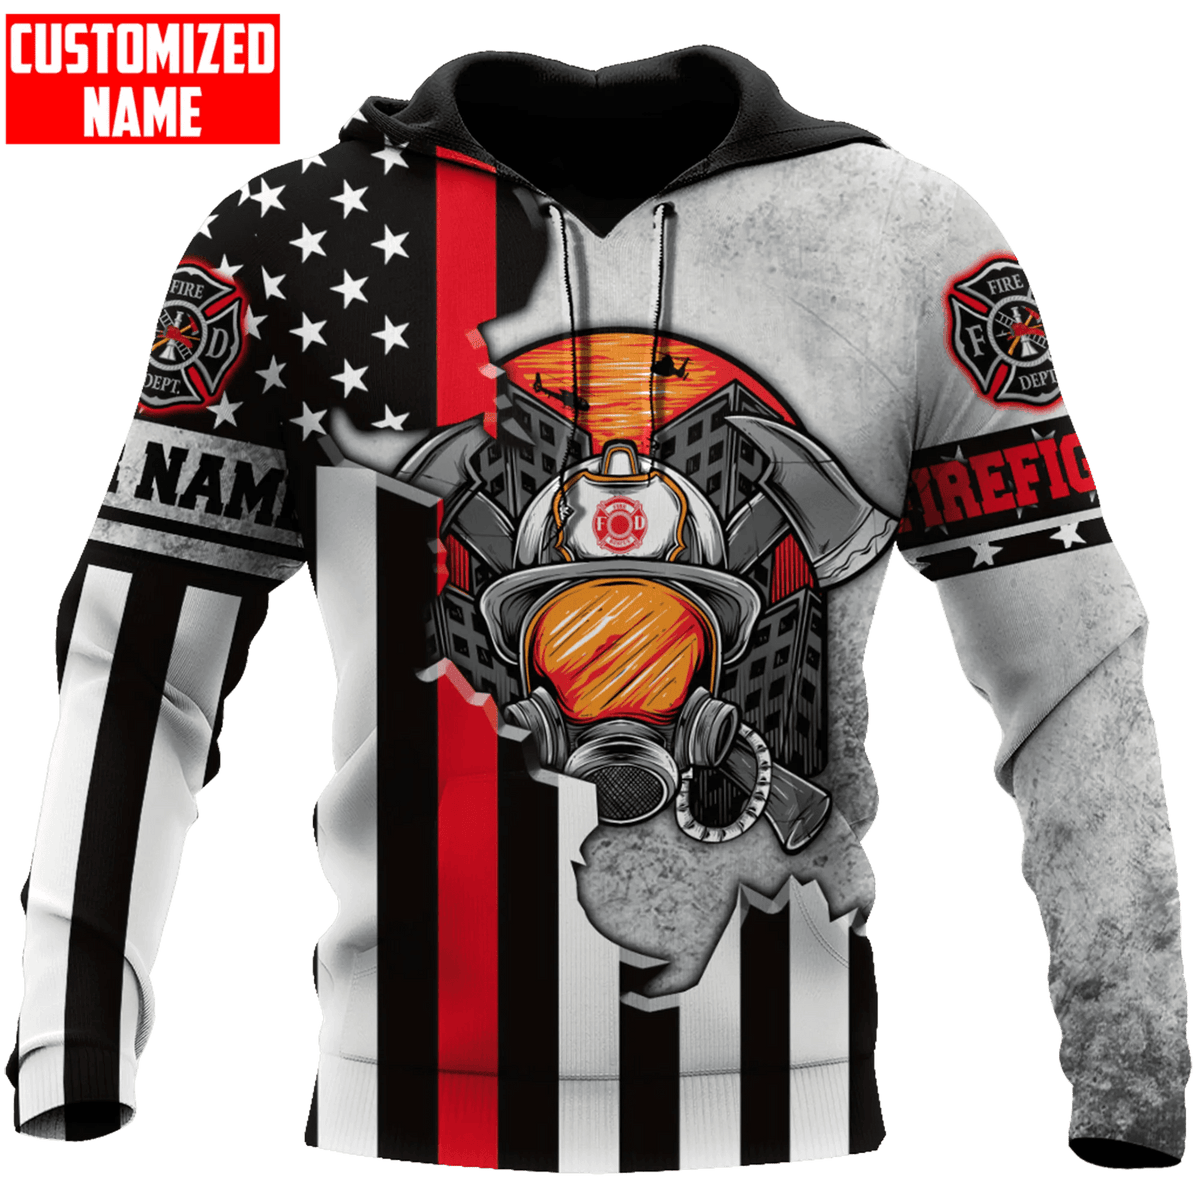 Customized With Your Name - Firefighter Red Stripe USA Flag Sublimated Hoodie, Zip-Up or Sweatshirt - Salty Medic Clothing Co.